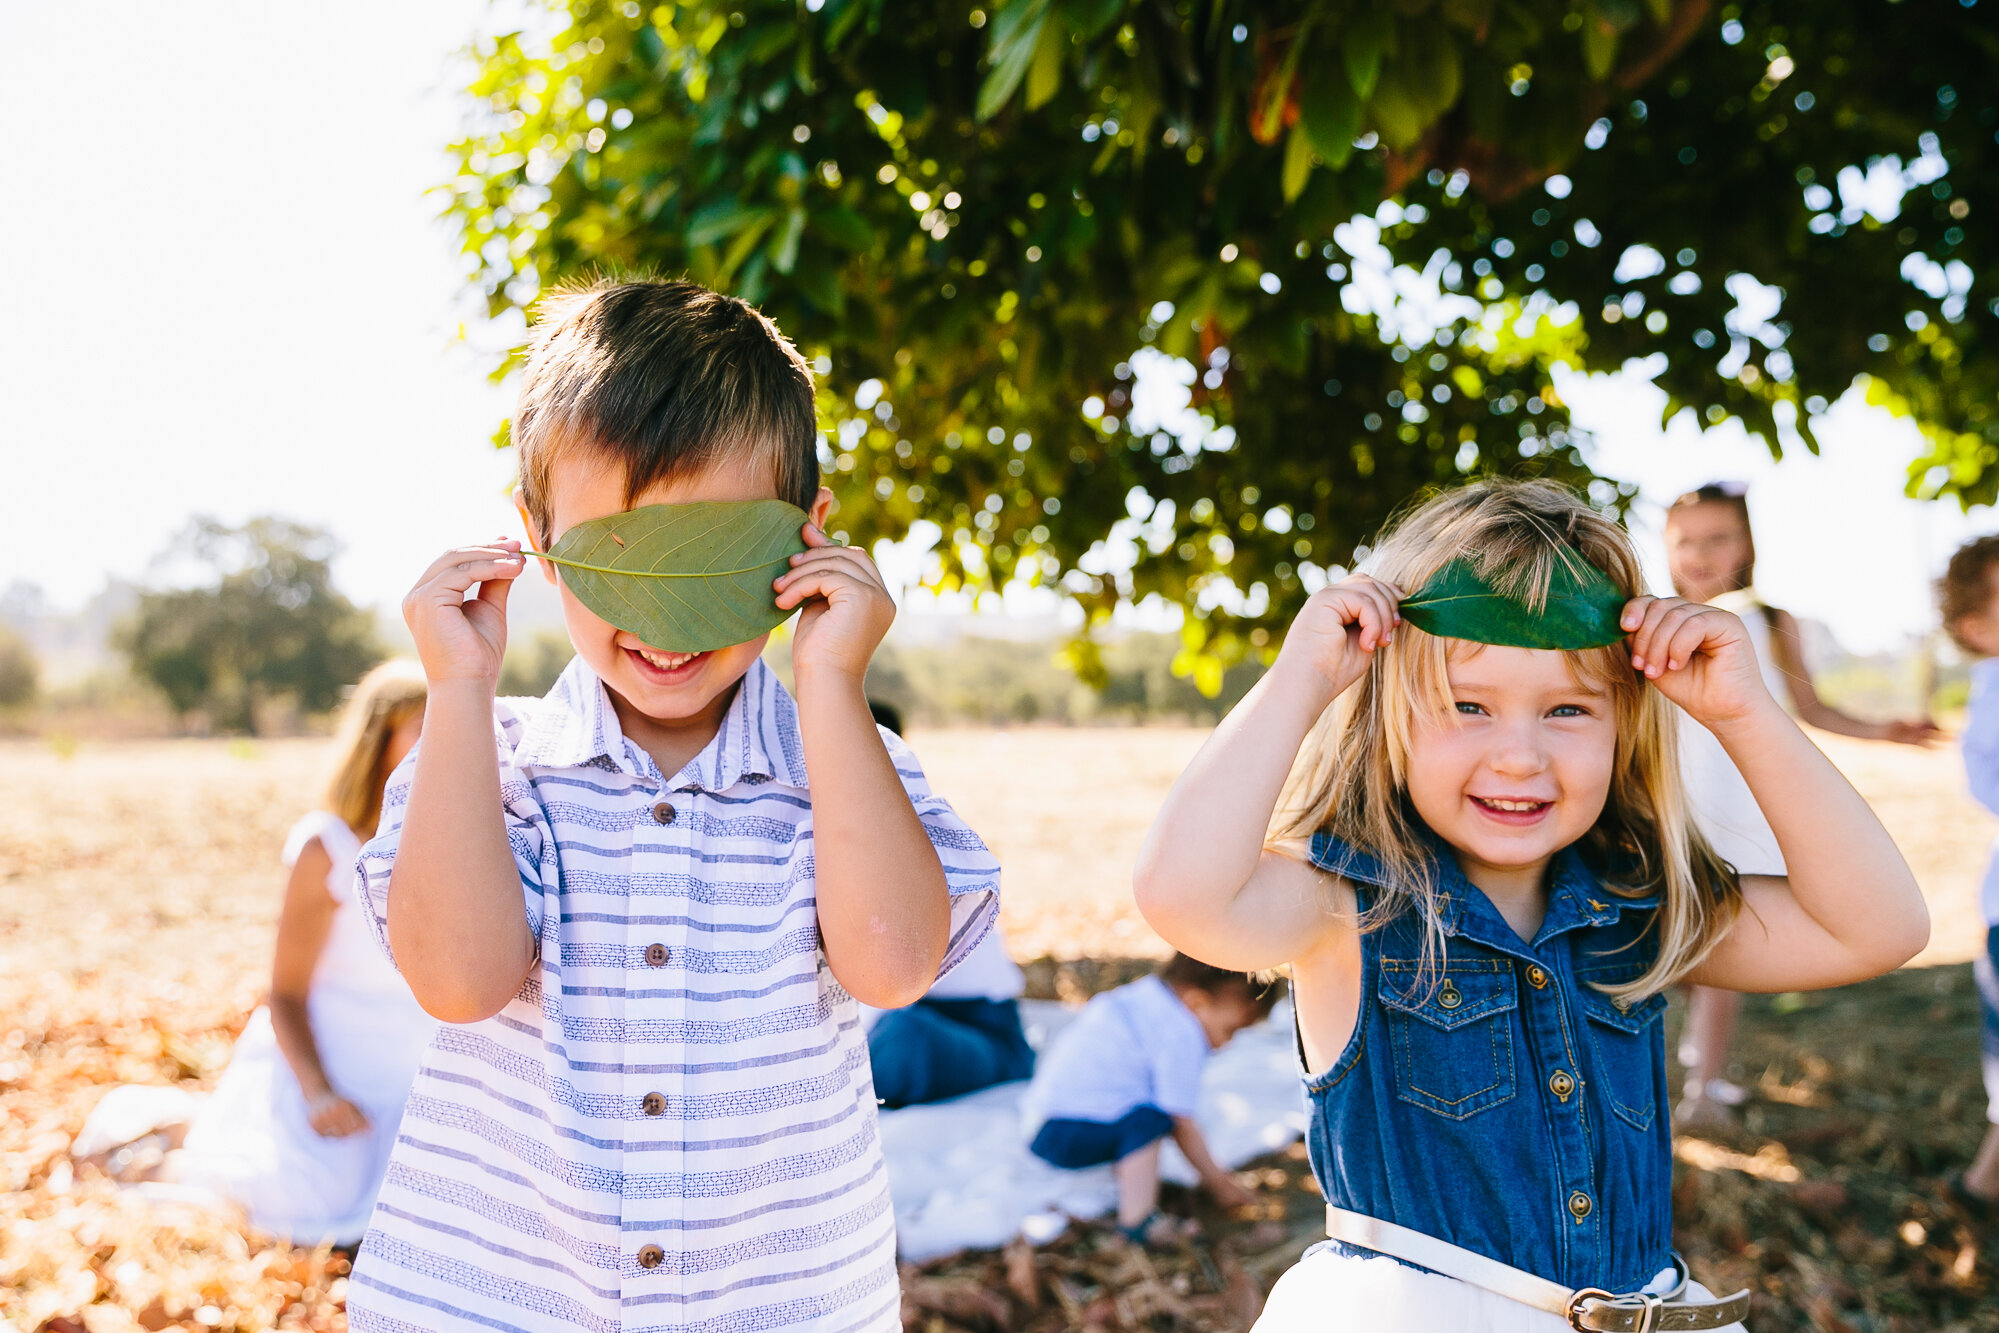 Los_Angeles_Family_Photography_Orange_County_Children_Babies_Field_Farm_Outdoors_Morning_Session_California_Girls_Boys_Kids_Photography-1271.jpg